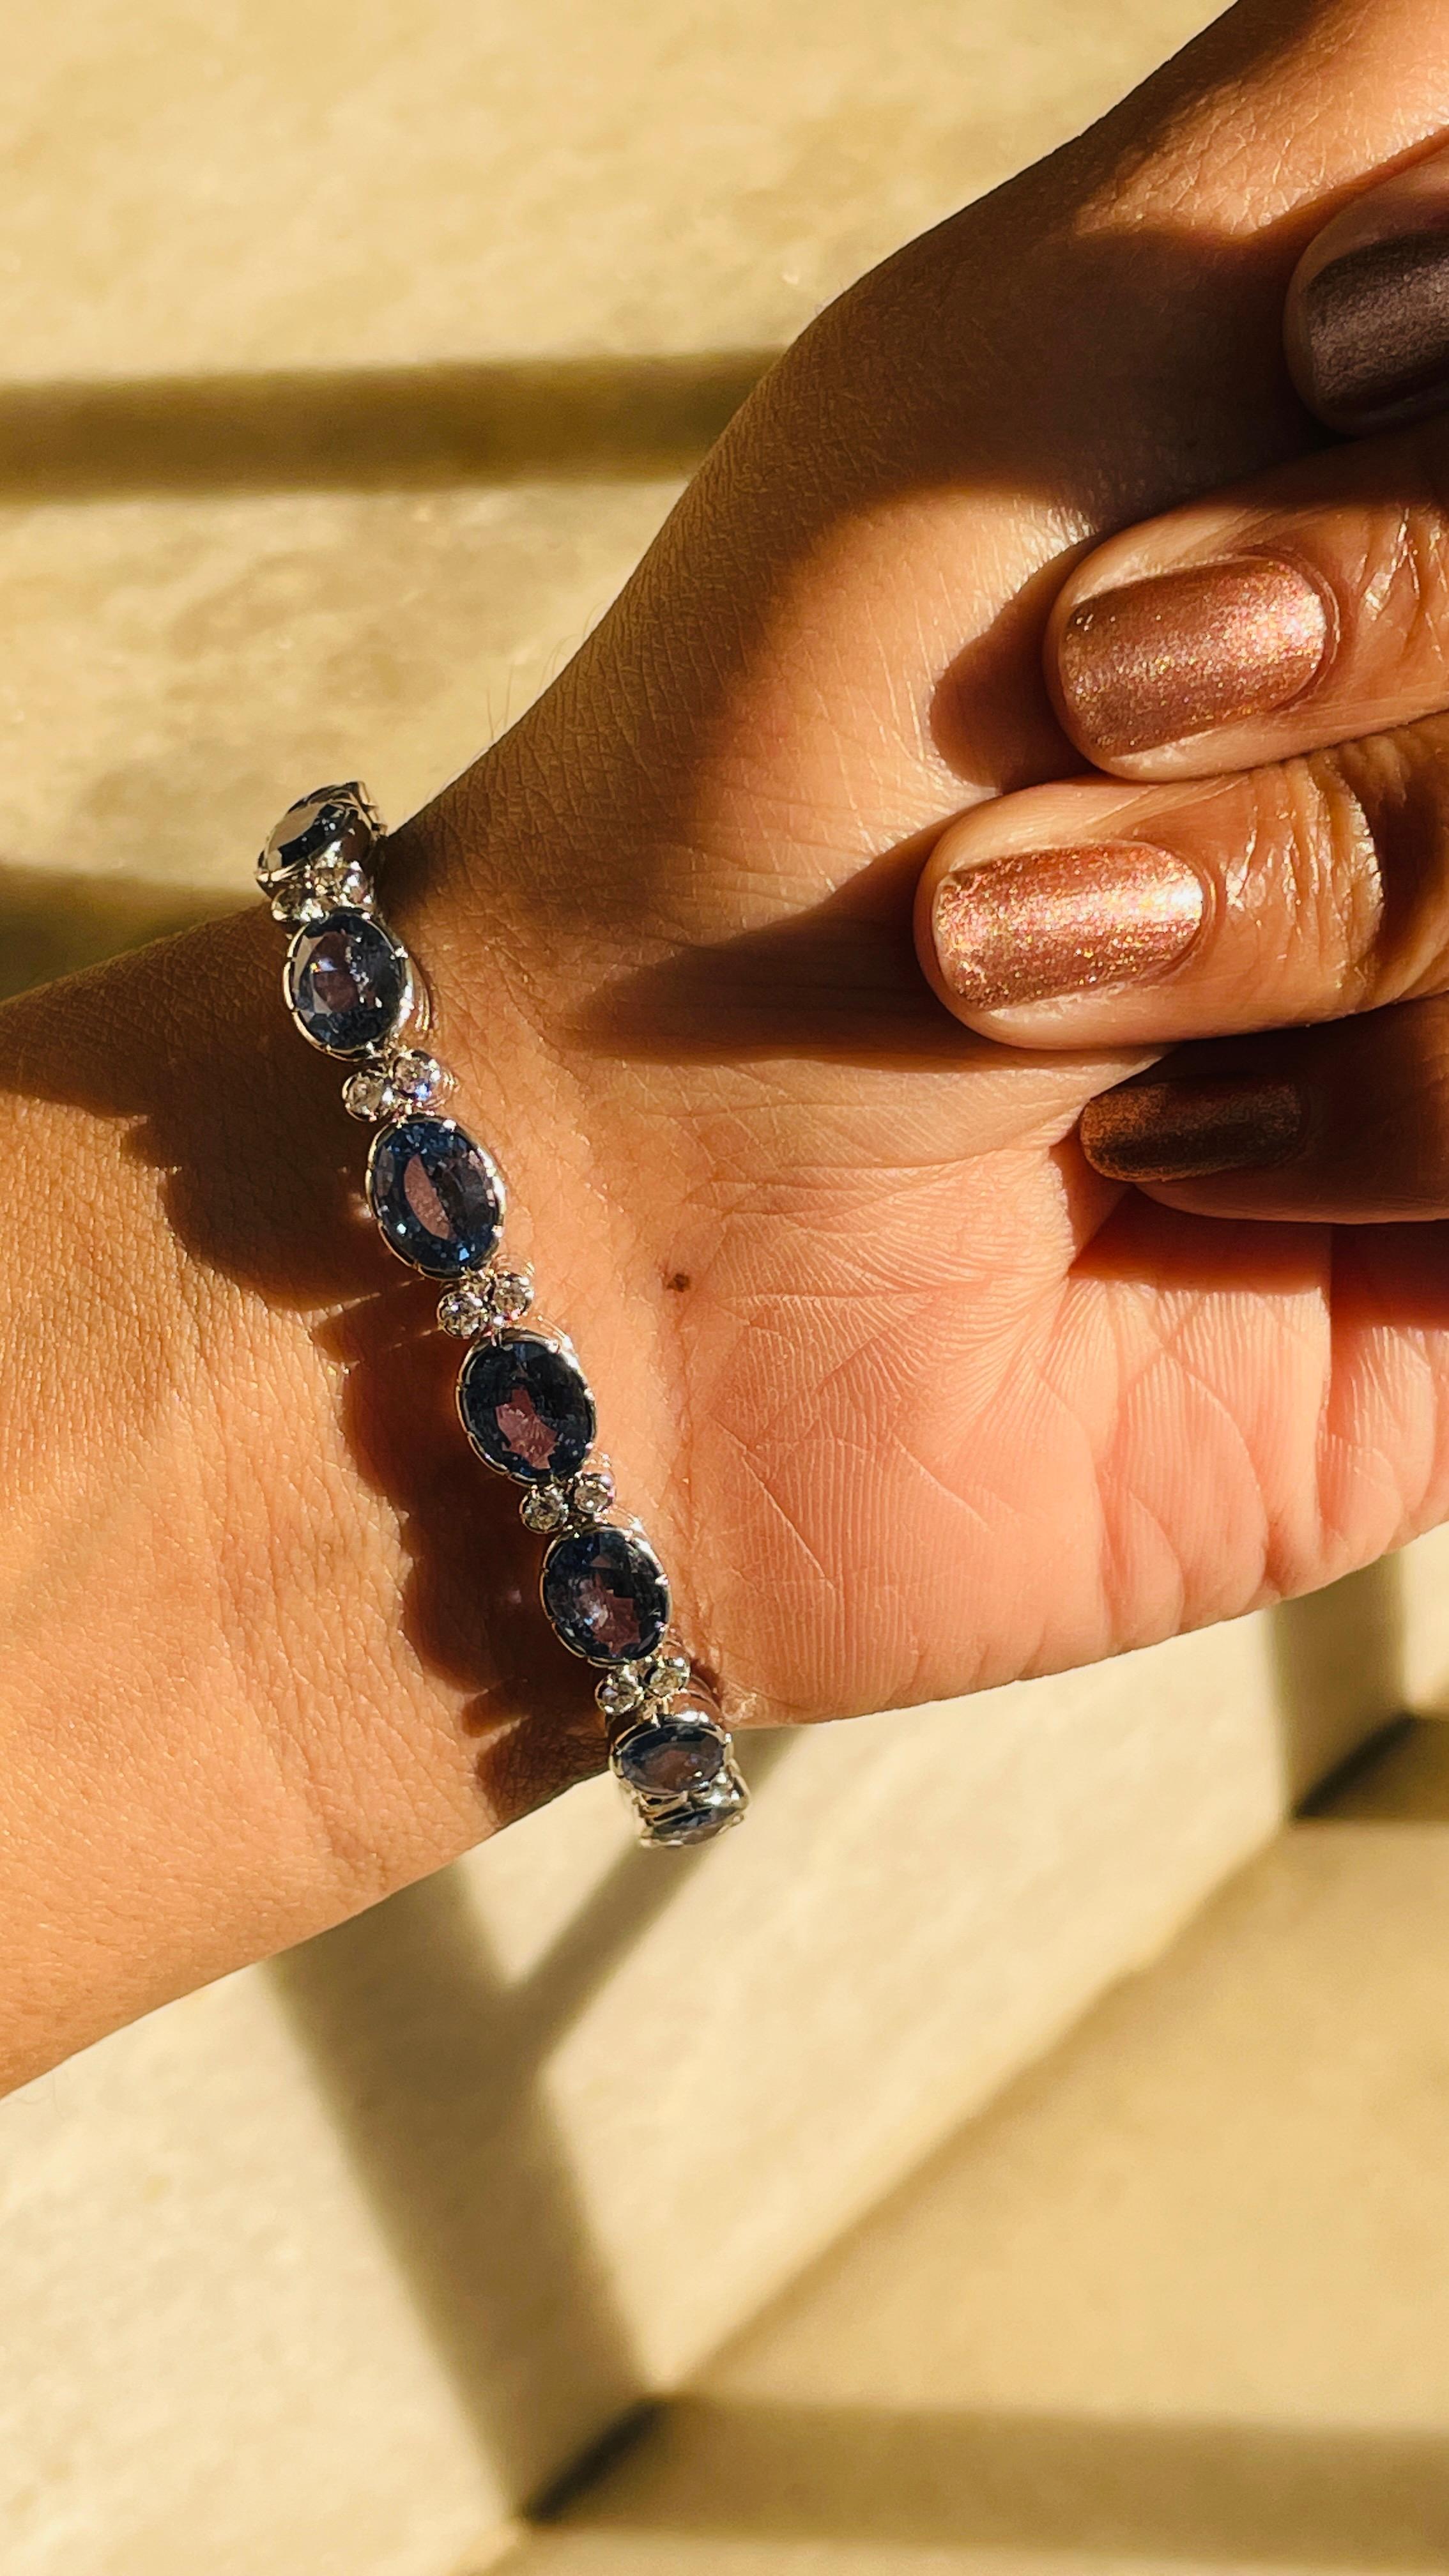 Blue sapphire and Diamond bracelet in 18K Gold. It has a perfect oval cut gemstone to make you stand out on any occasion or an event.
A tennis bracelet is an essential piece of jewelry when it comes to your wedding day. The sleek and elegant style